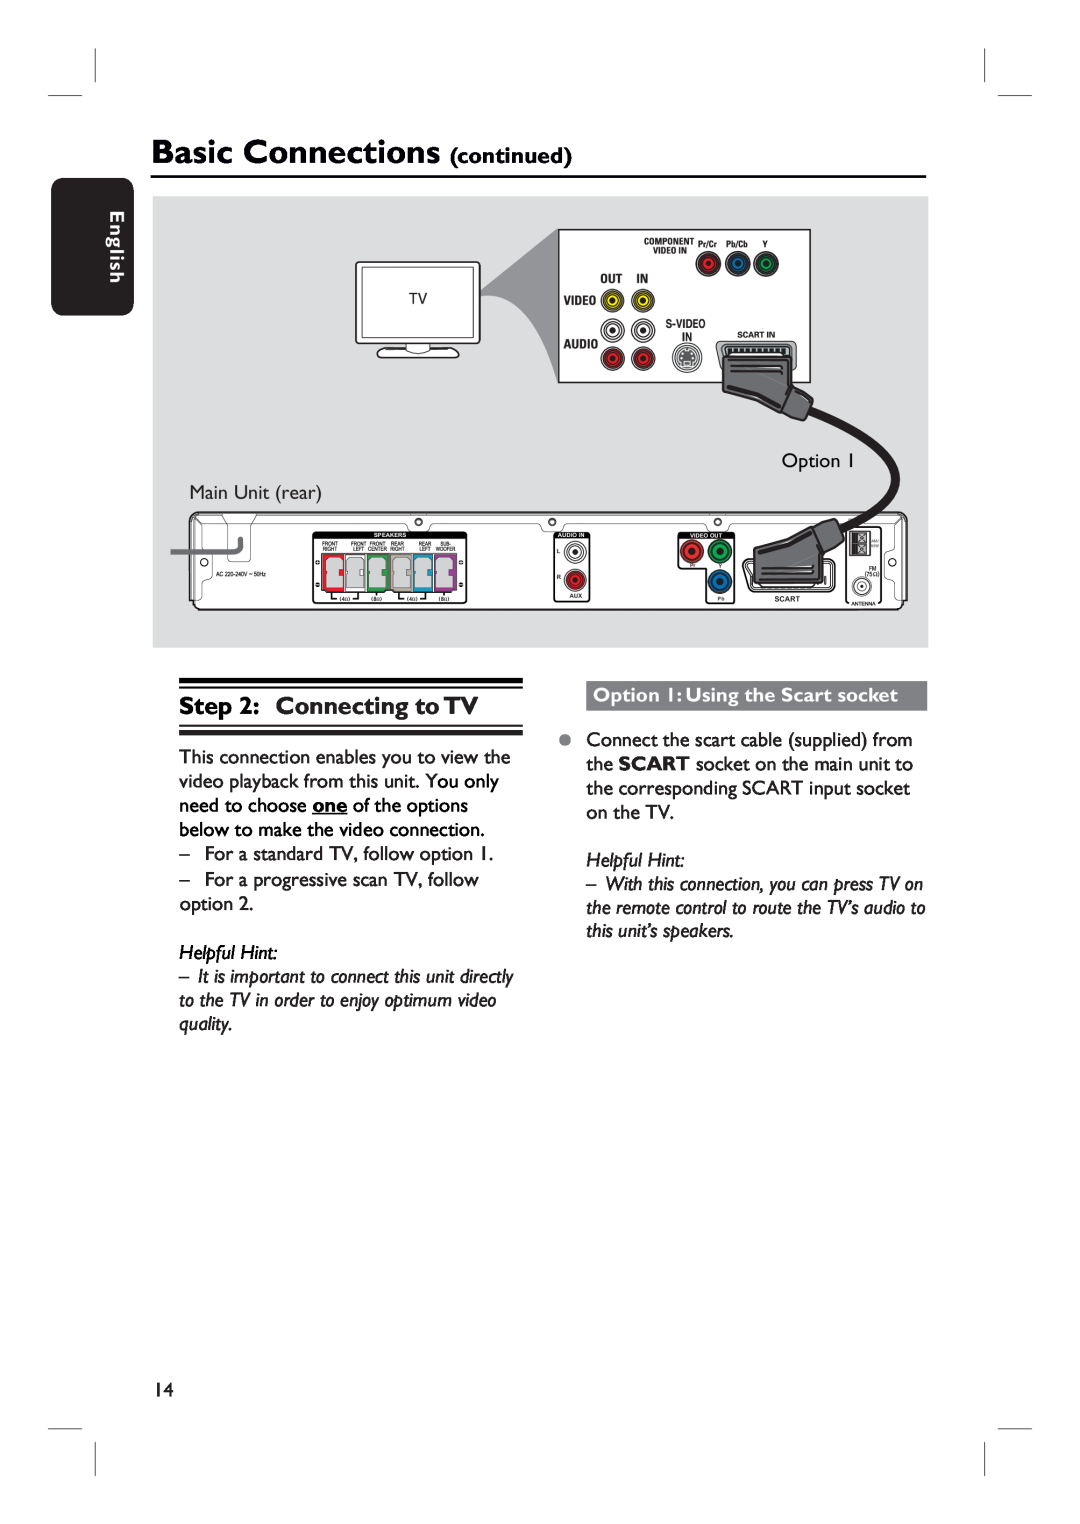 Philips HTS3154 user manual Basic Connections continued, Connecting to TV, Option 1 Using the Scart socket, English 